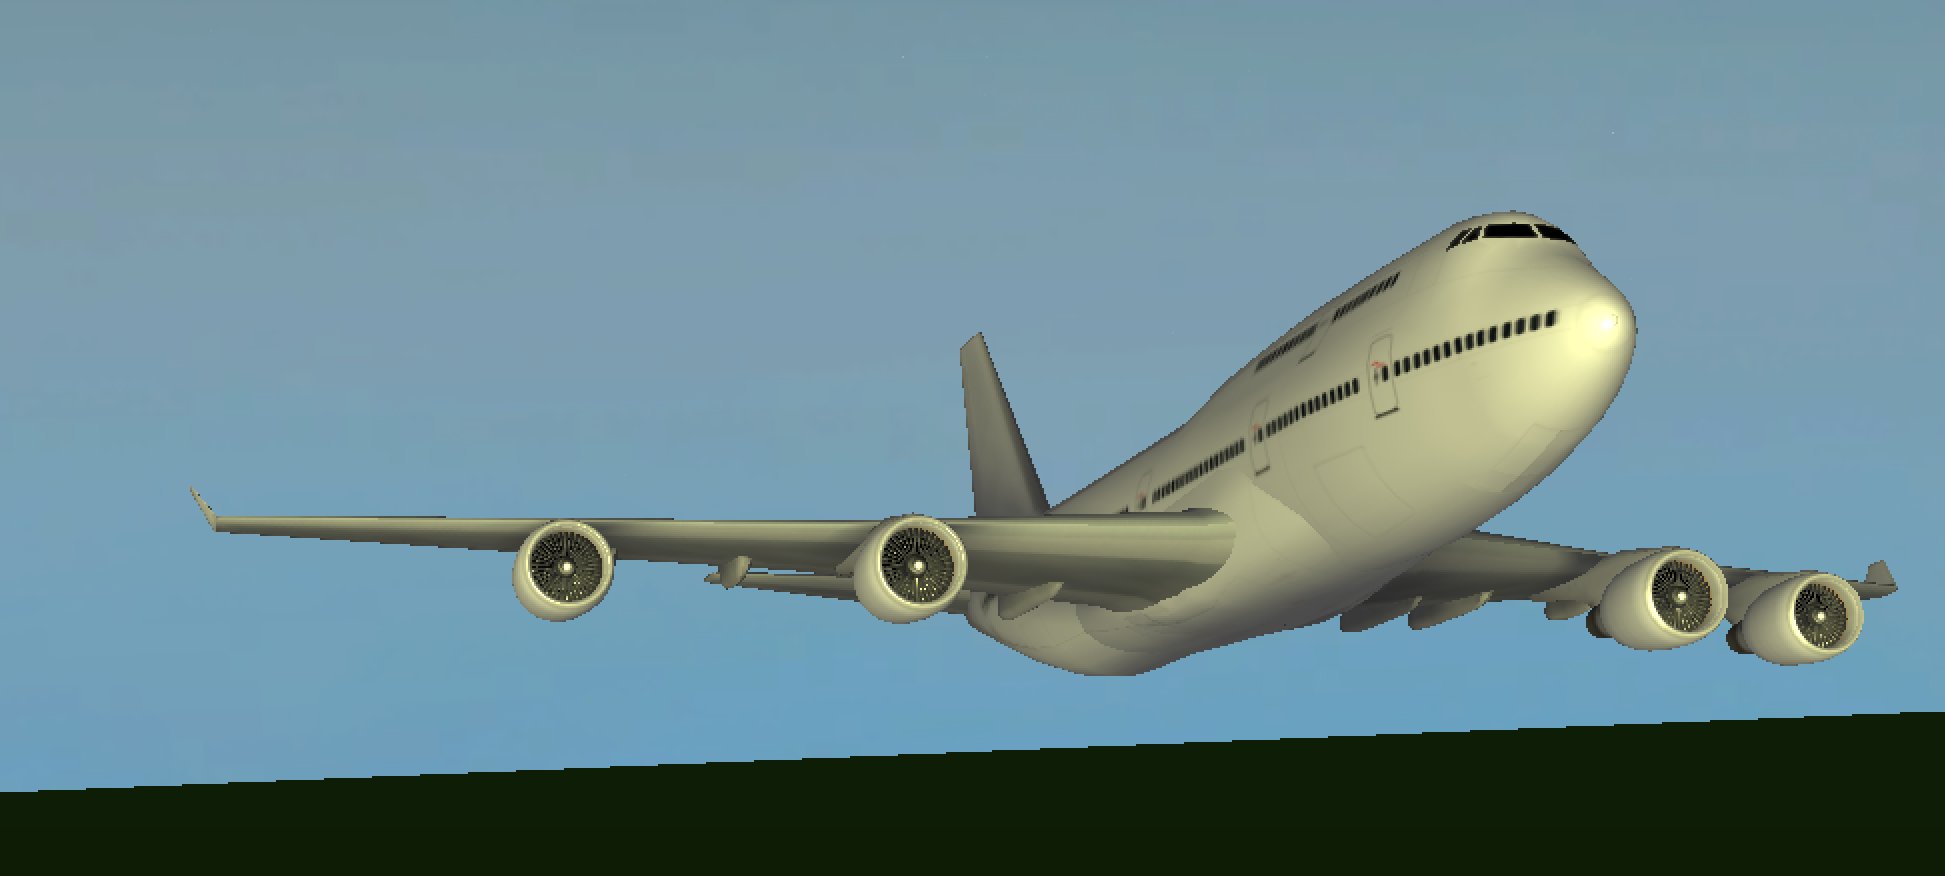 Jaymanlive On Twitter Welcome To The Flightline 747 400